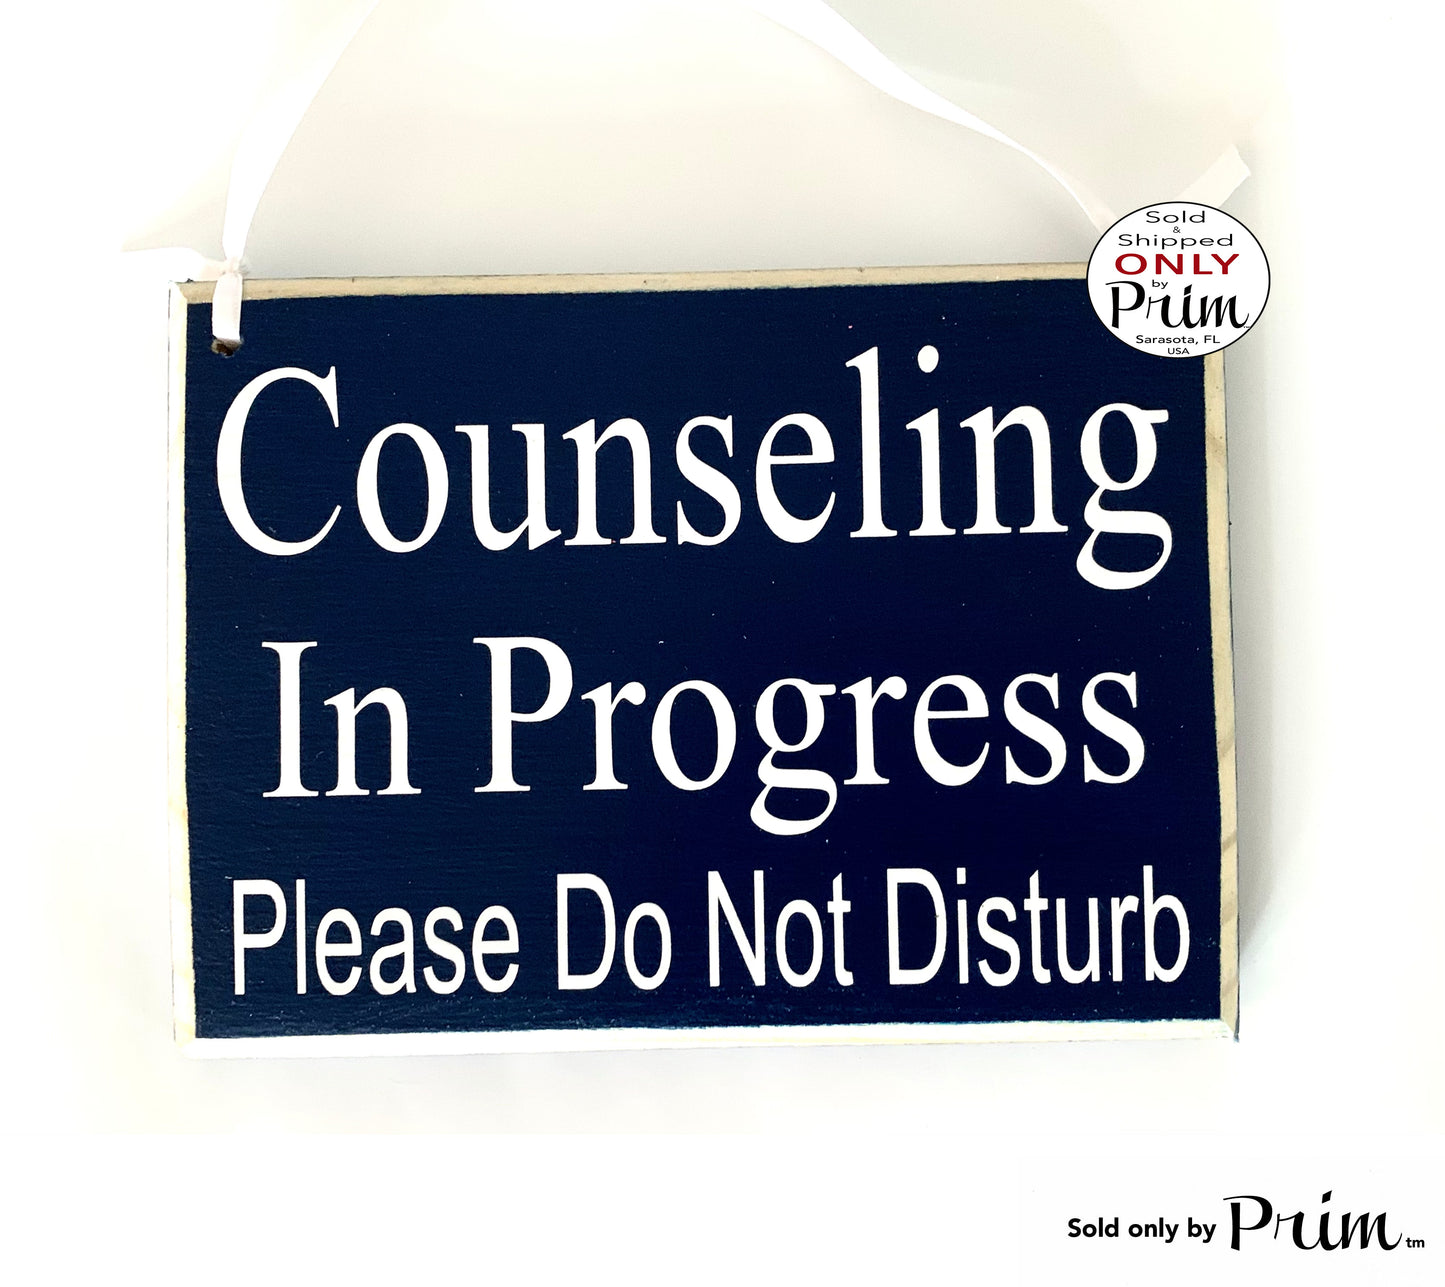 Designs by Prim 8x6 Counseling In Progress Please Do Not Disturb Custom Wood Sign Counselor Session Therapy Be With You Shortly Private Meeting Door Plaque